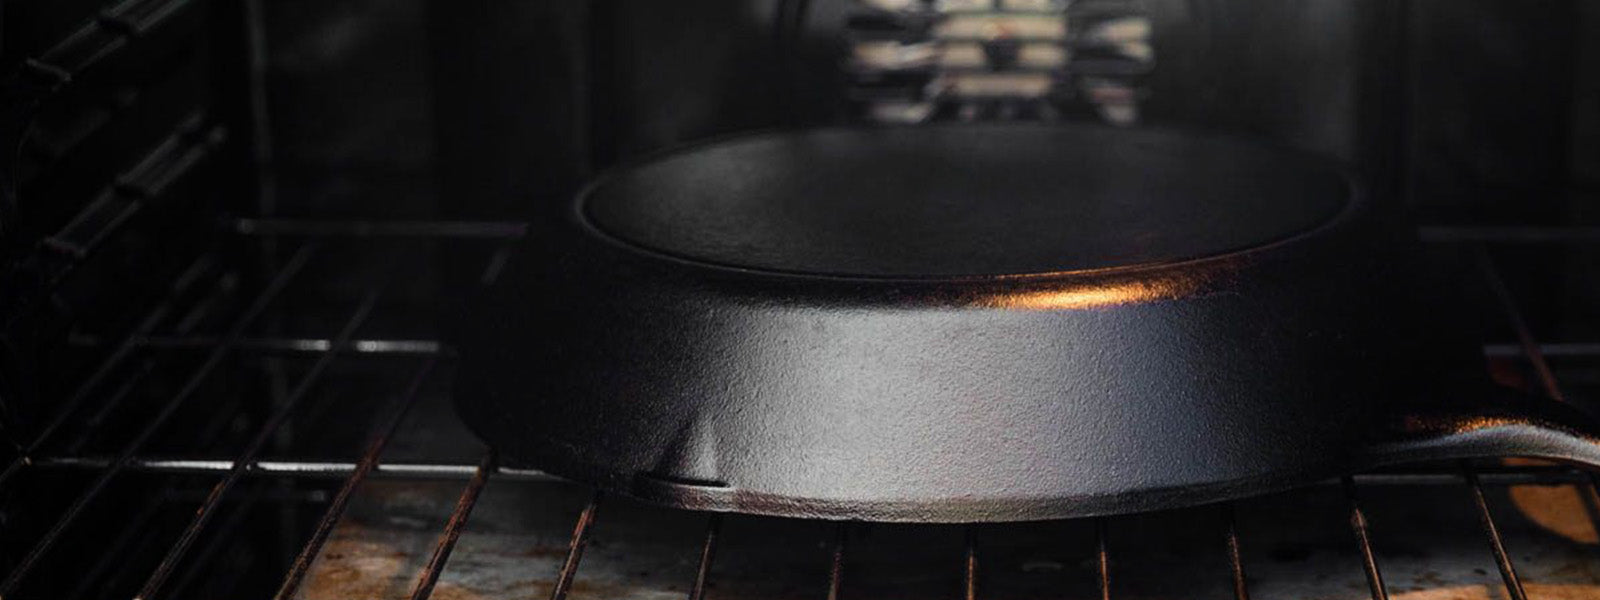 My first time restoring a cast iron pan! Now, any storage